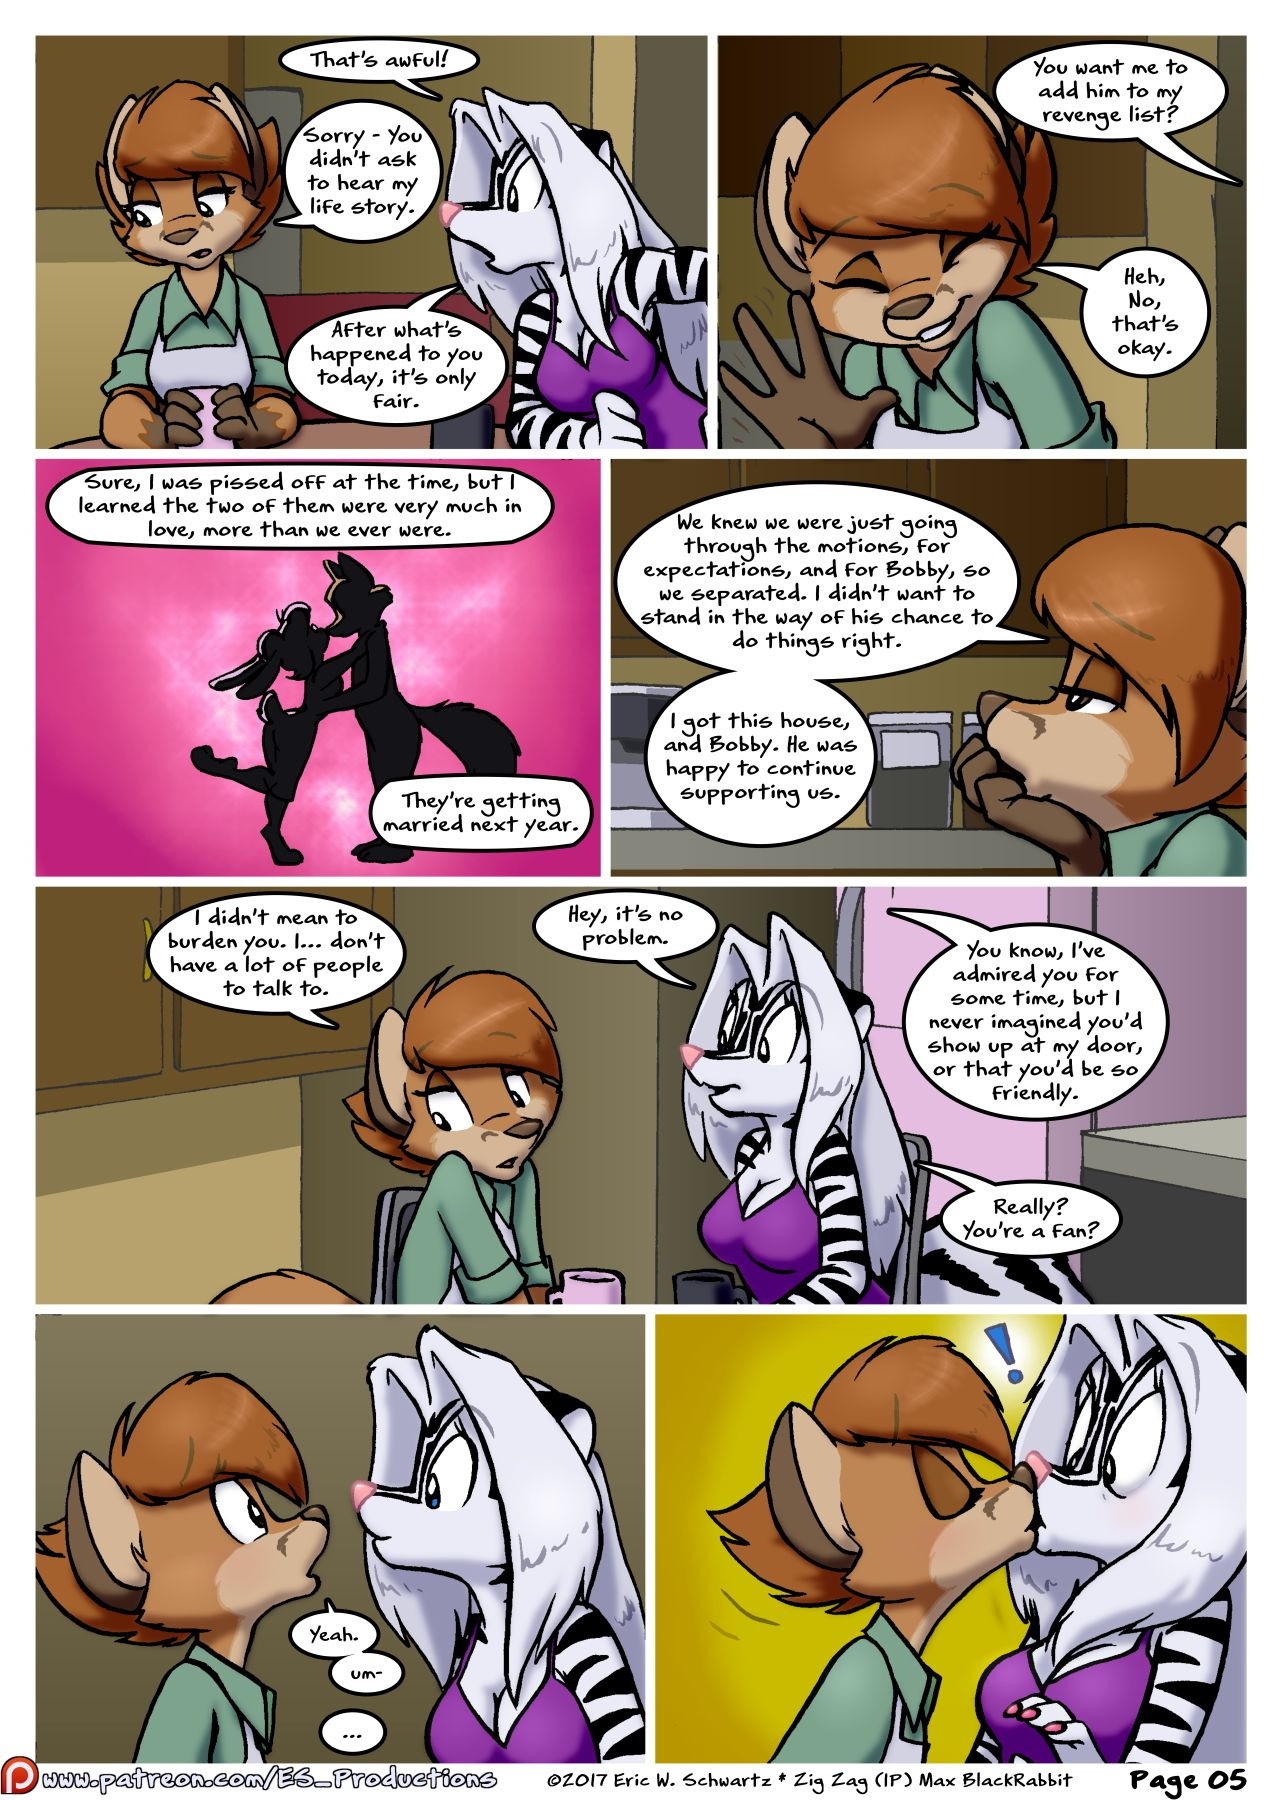 Adventure Begins at Home - Page 6